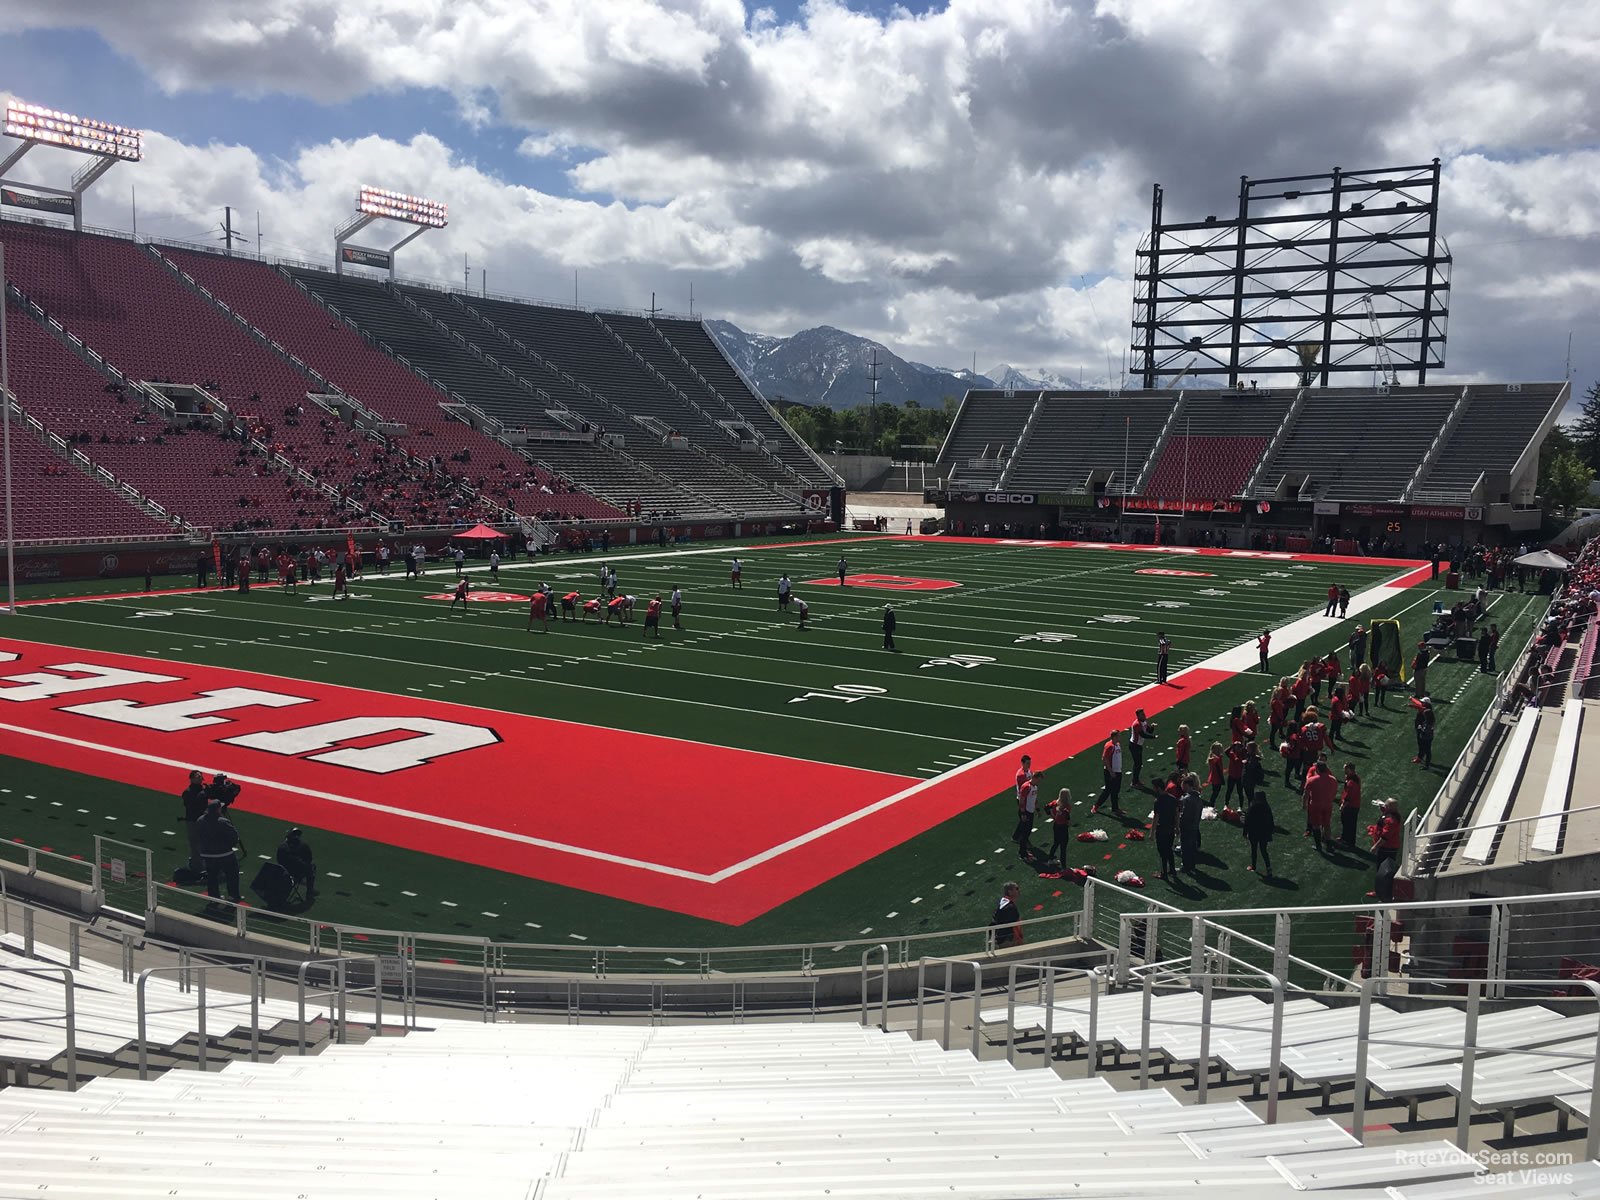 section n21, row 20 seat view  - rice-eccles stadium